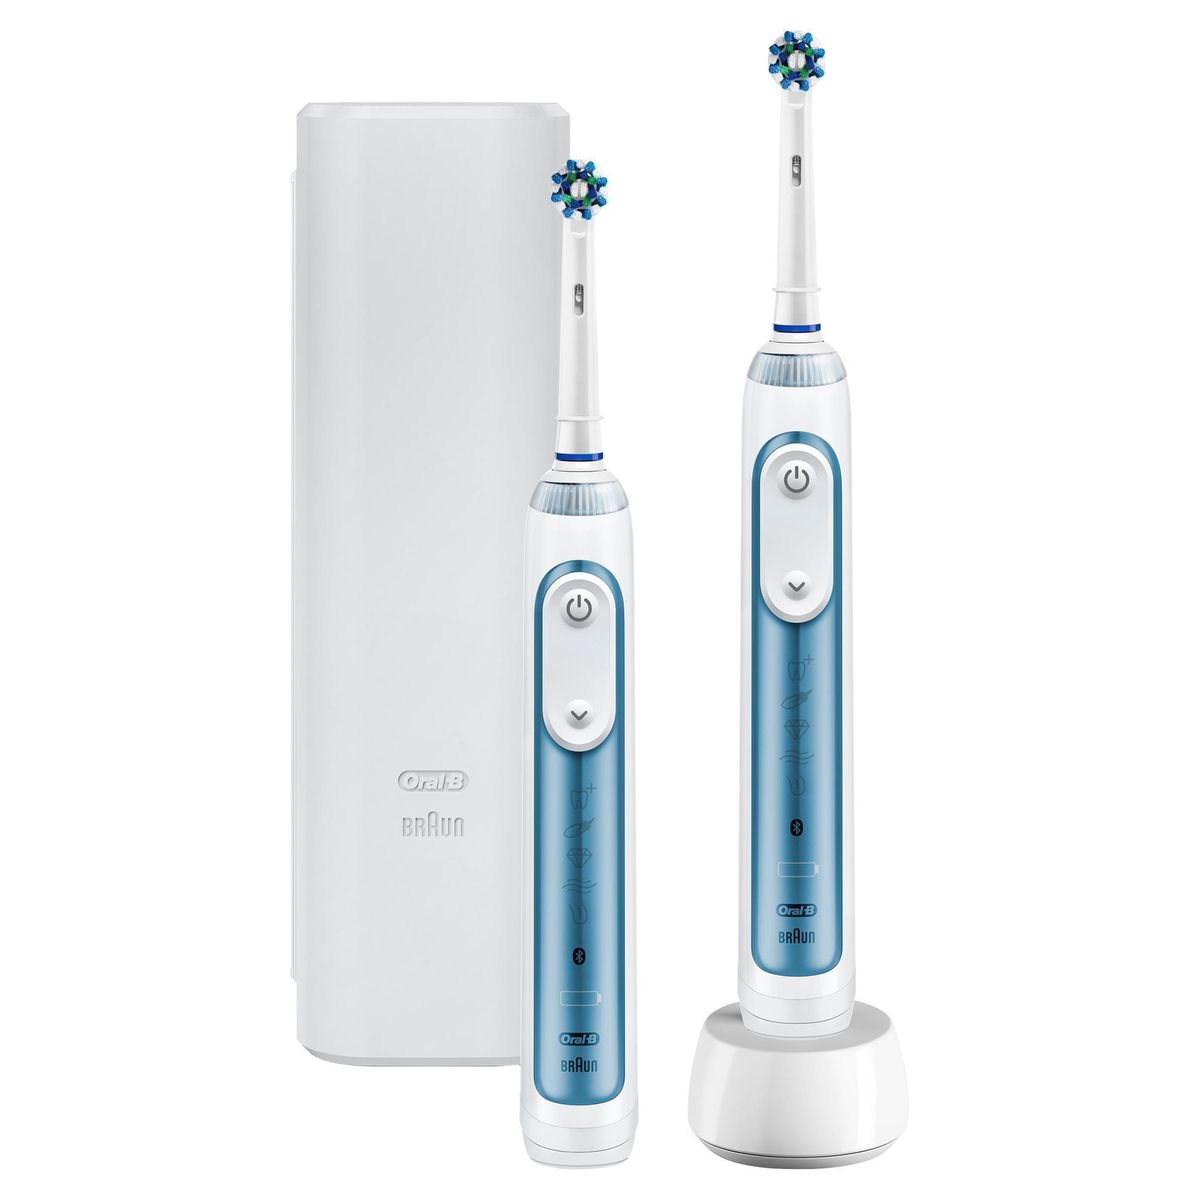 Oral-B Smart Expert Electric Toothbrush/Electric Toothbrush, Twin Pack, 5 Cleaning Modes for Dental Care & Bluetooth App, Blue Pack of 2